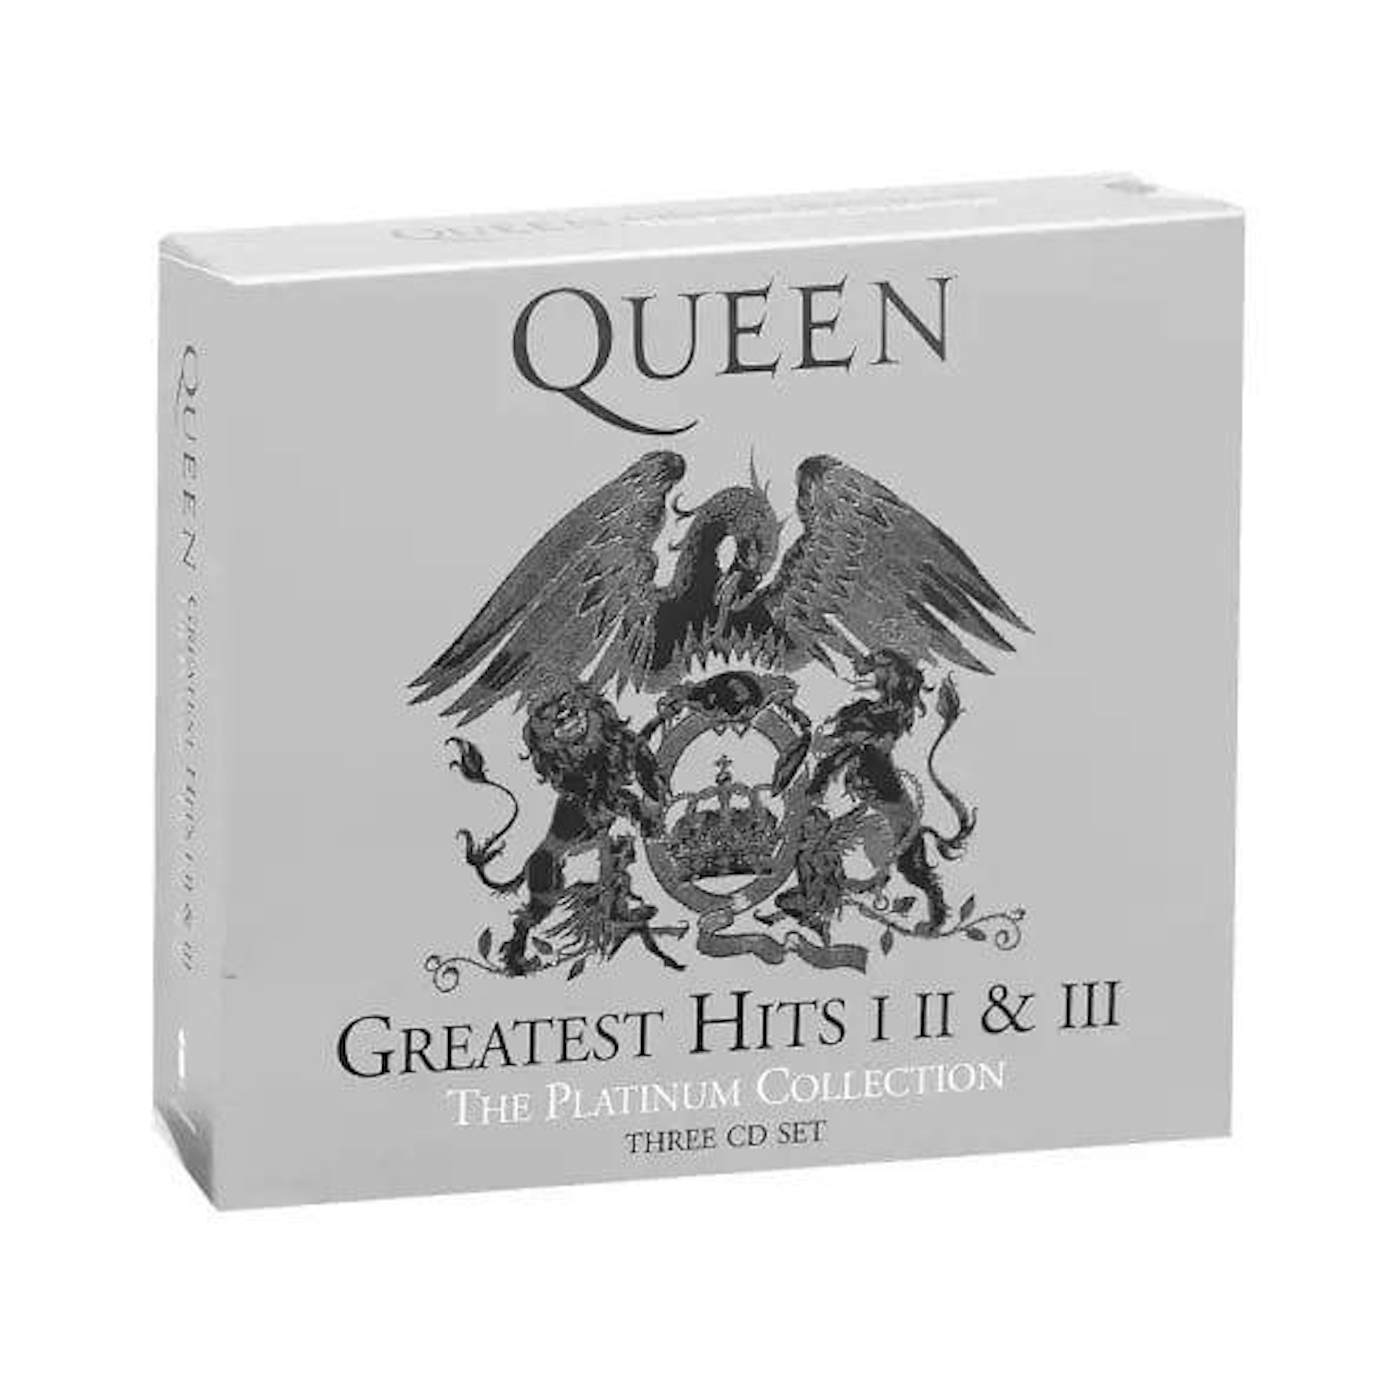 Greatest hits collection